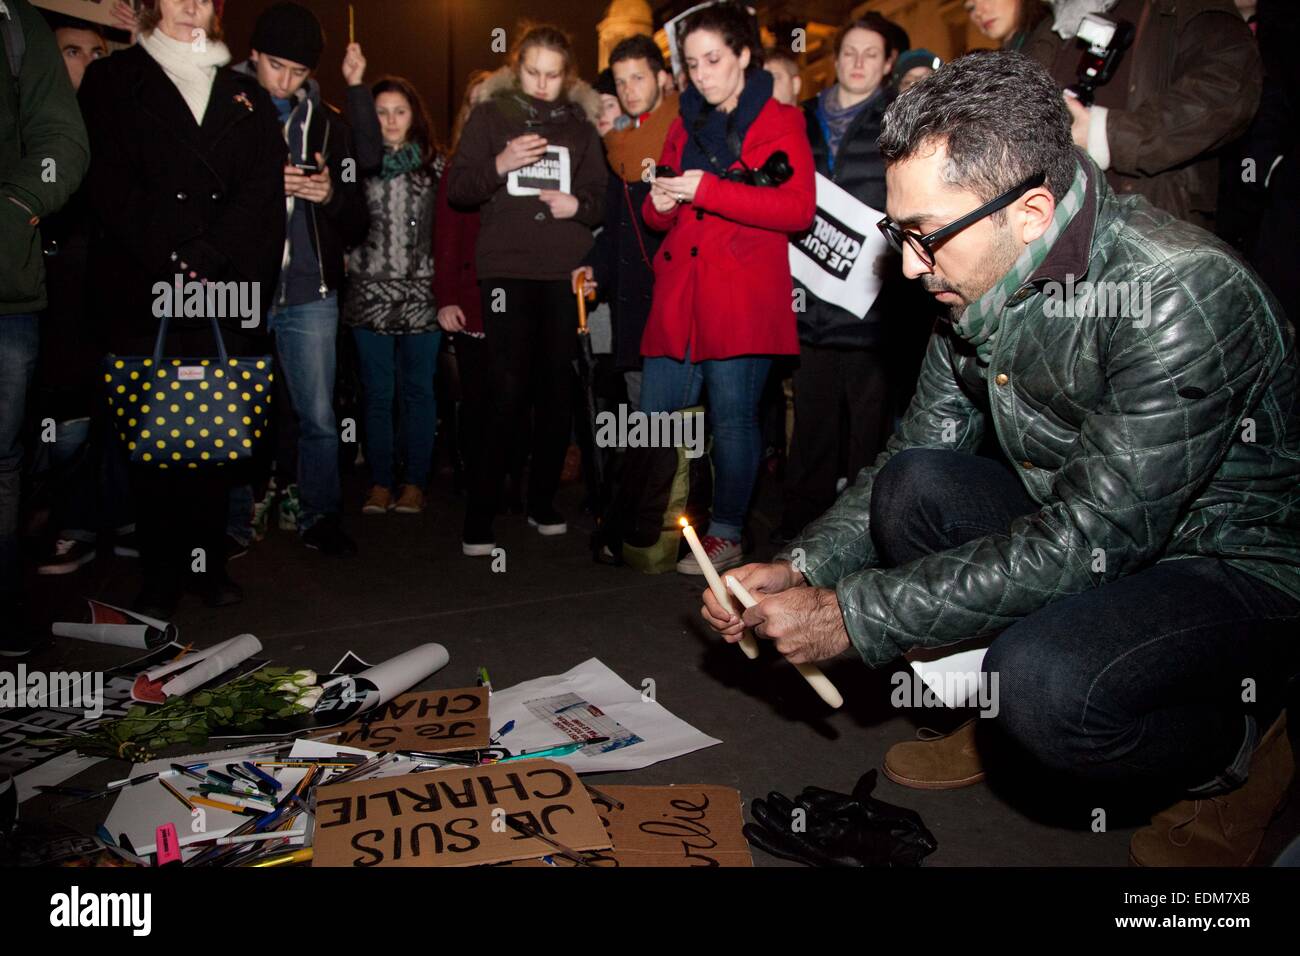 London, UK. 7th January, 2015. A vigil was held in London tonight, and in other cities around the world, in support of the victims of the attack at French magazine Charlie Hebdo in which 12 people were killed. Credit:  nelson pereira/Alamy Live News Stock Photo